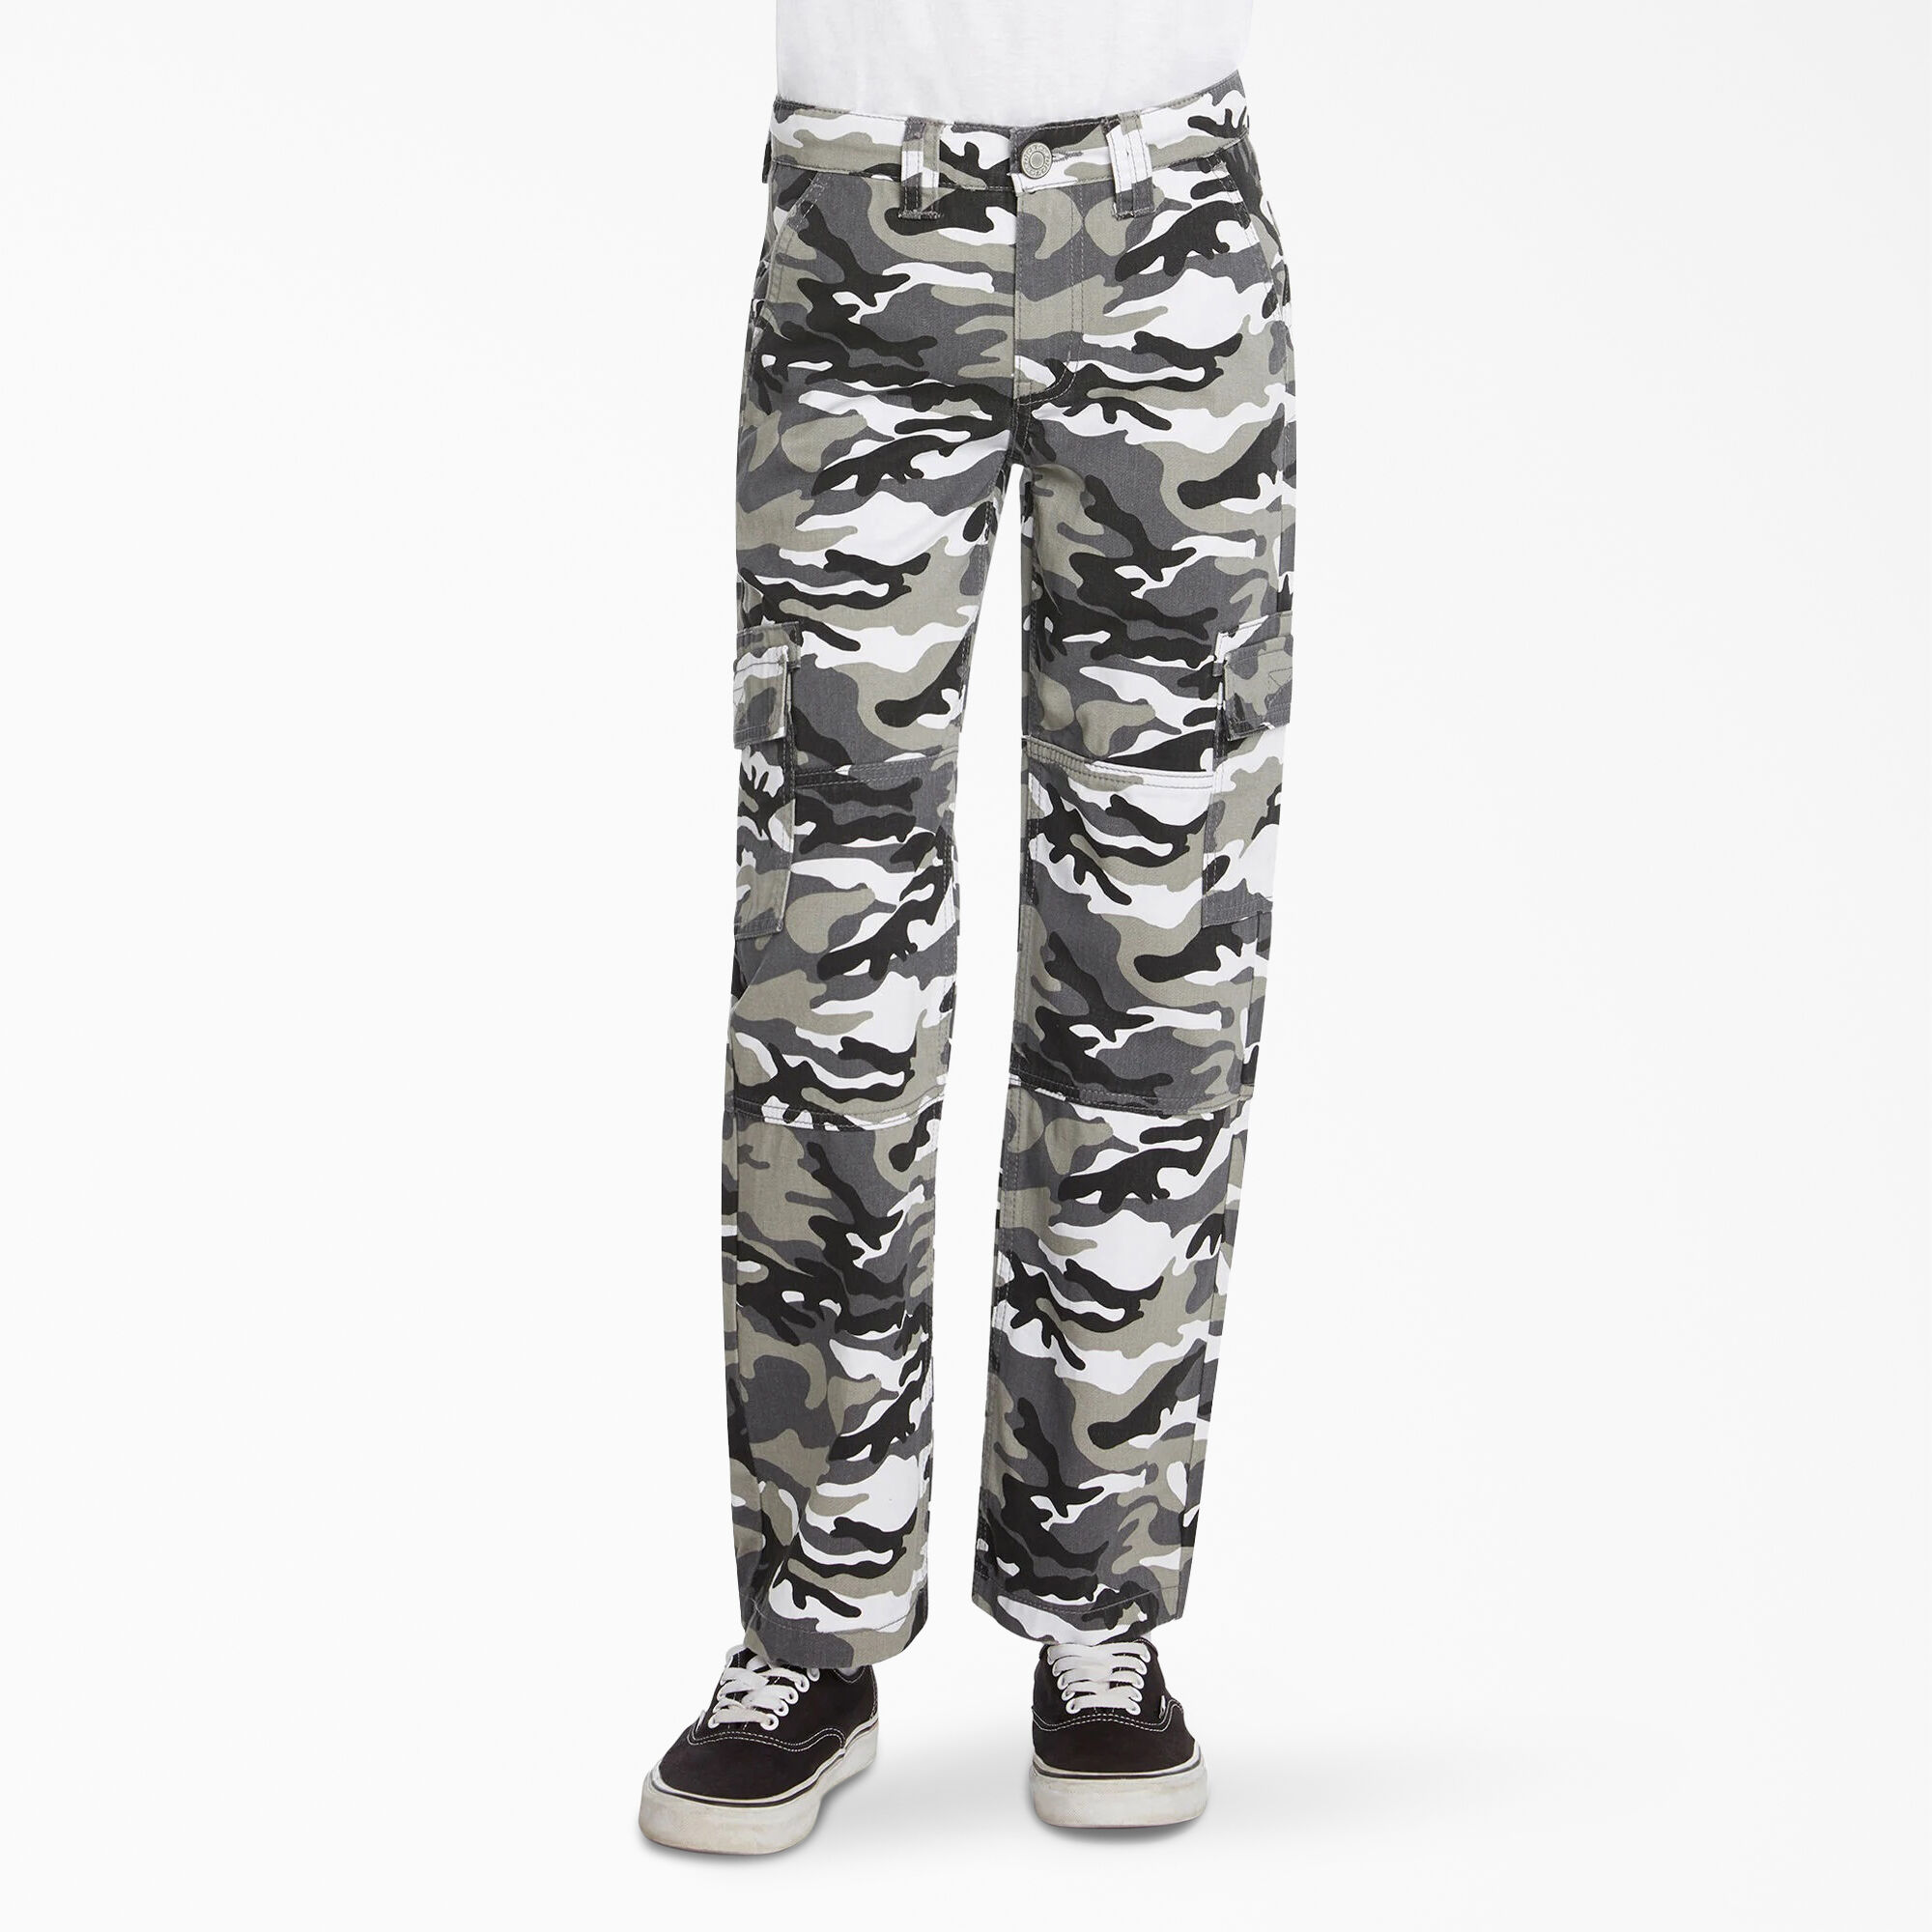 black and white camo cargo pants womens